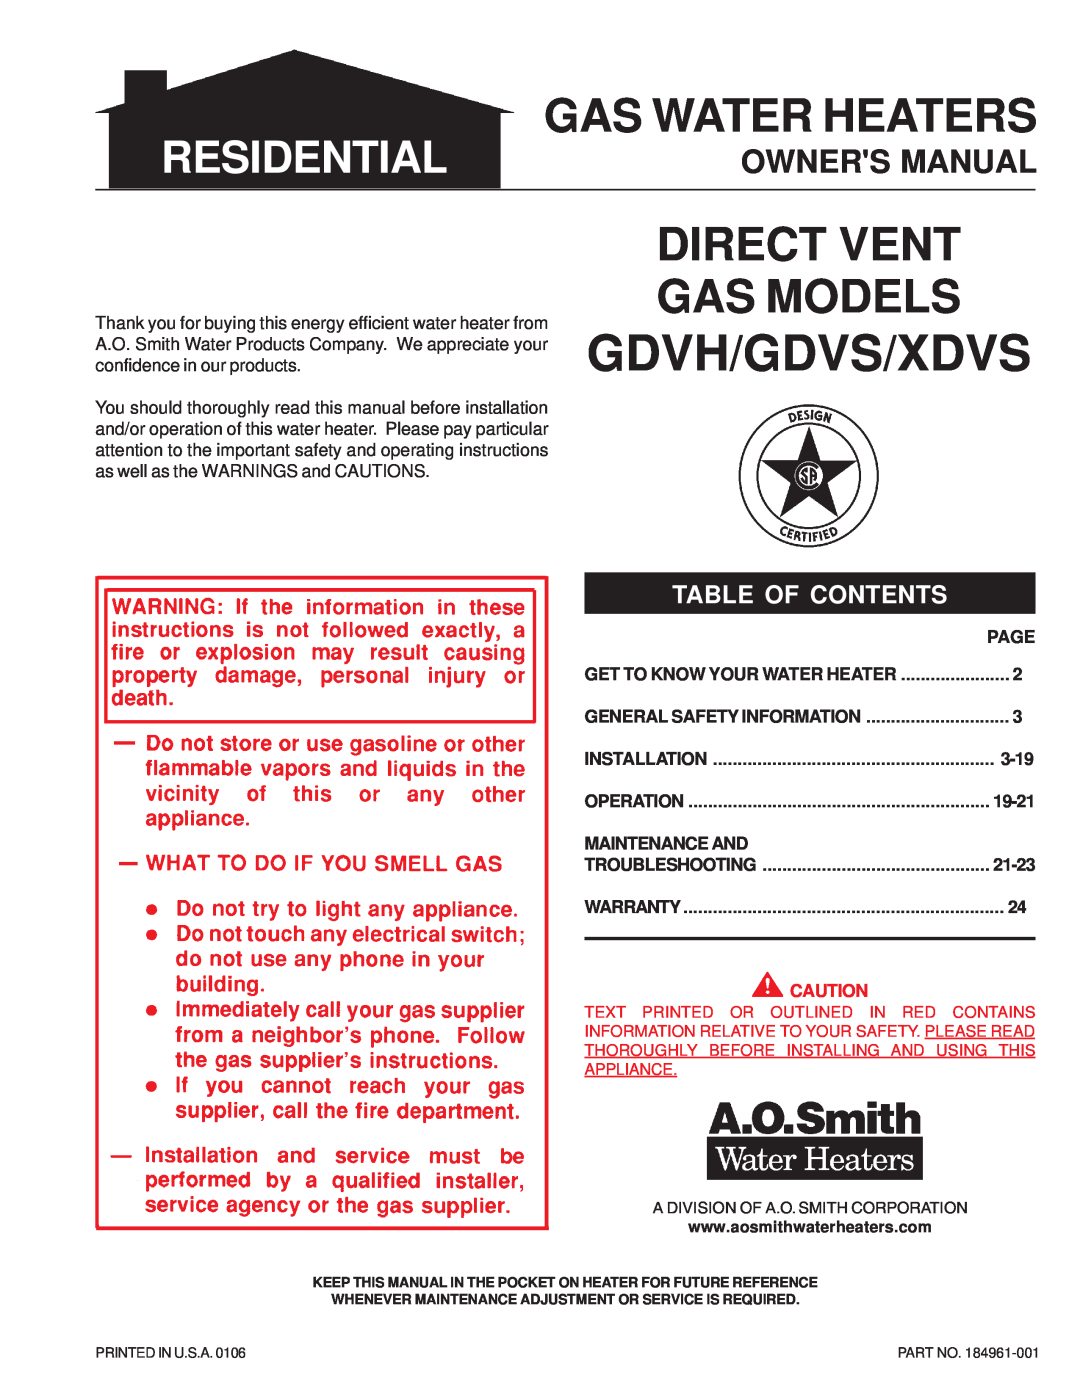 A.O. Smith GDVS owner manual Owners Manual, Page, 3-19, 19-21, Maintenance And, 21-23, Direct Vent Gas Models, Residential 